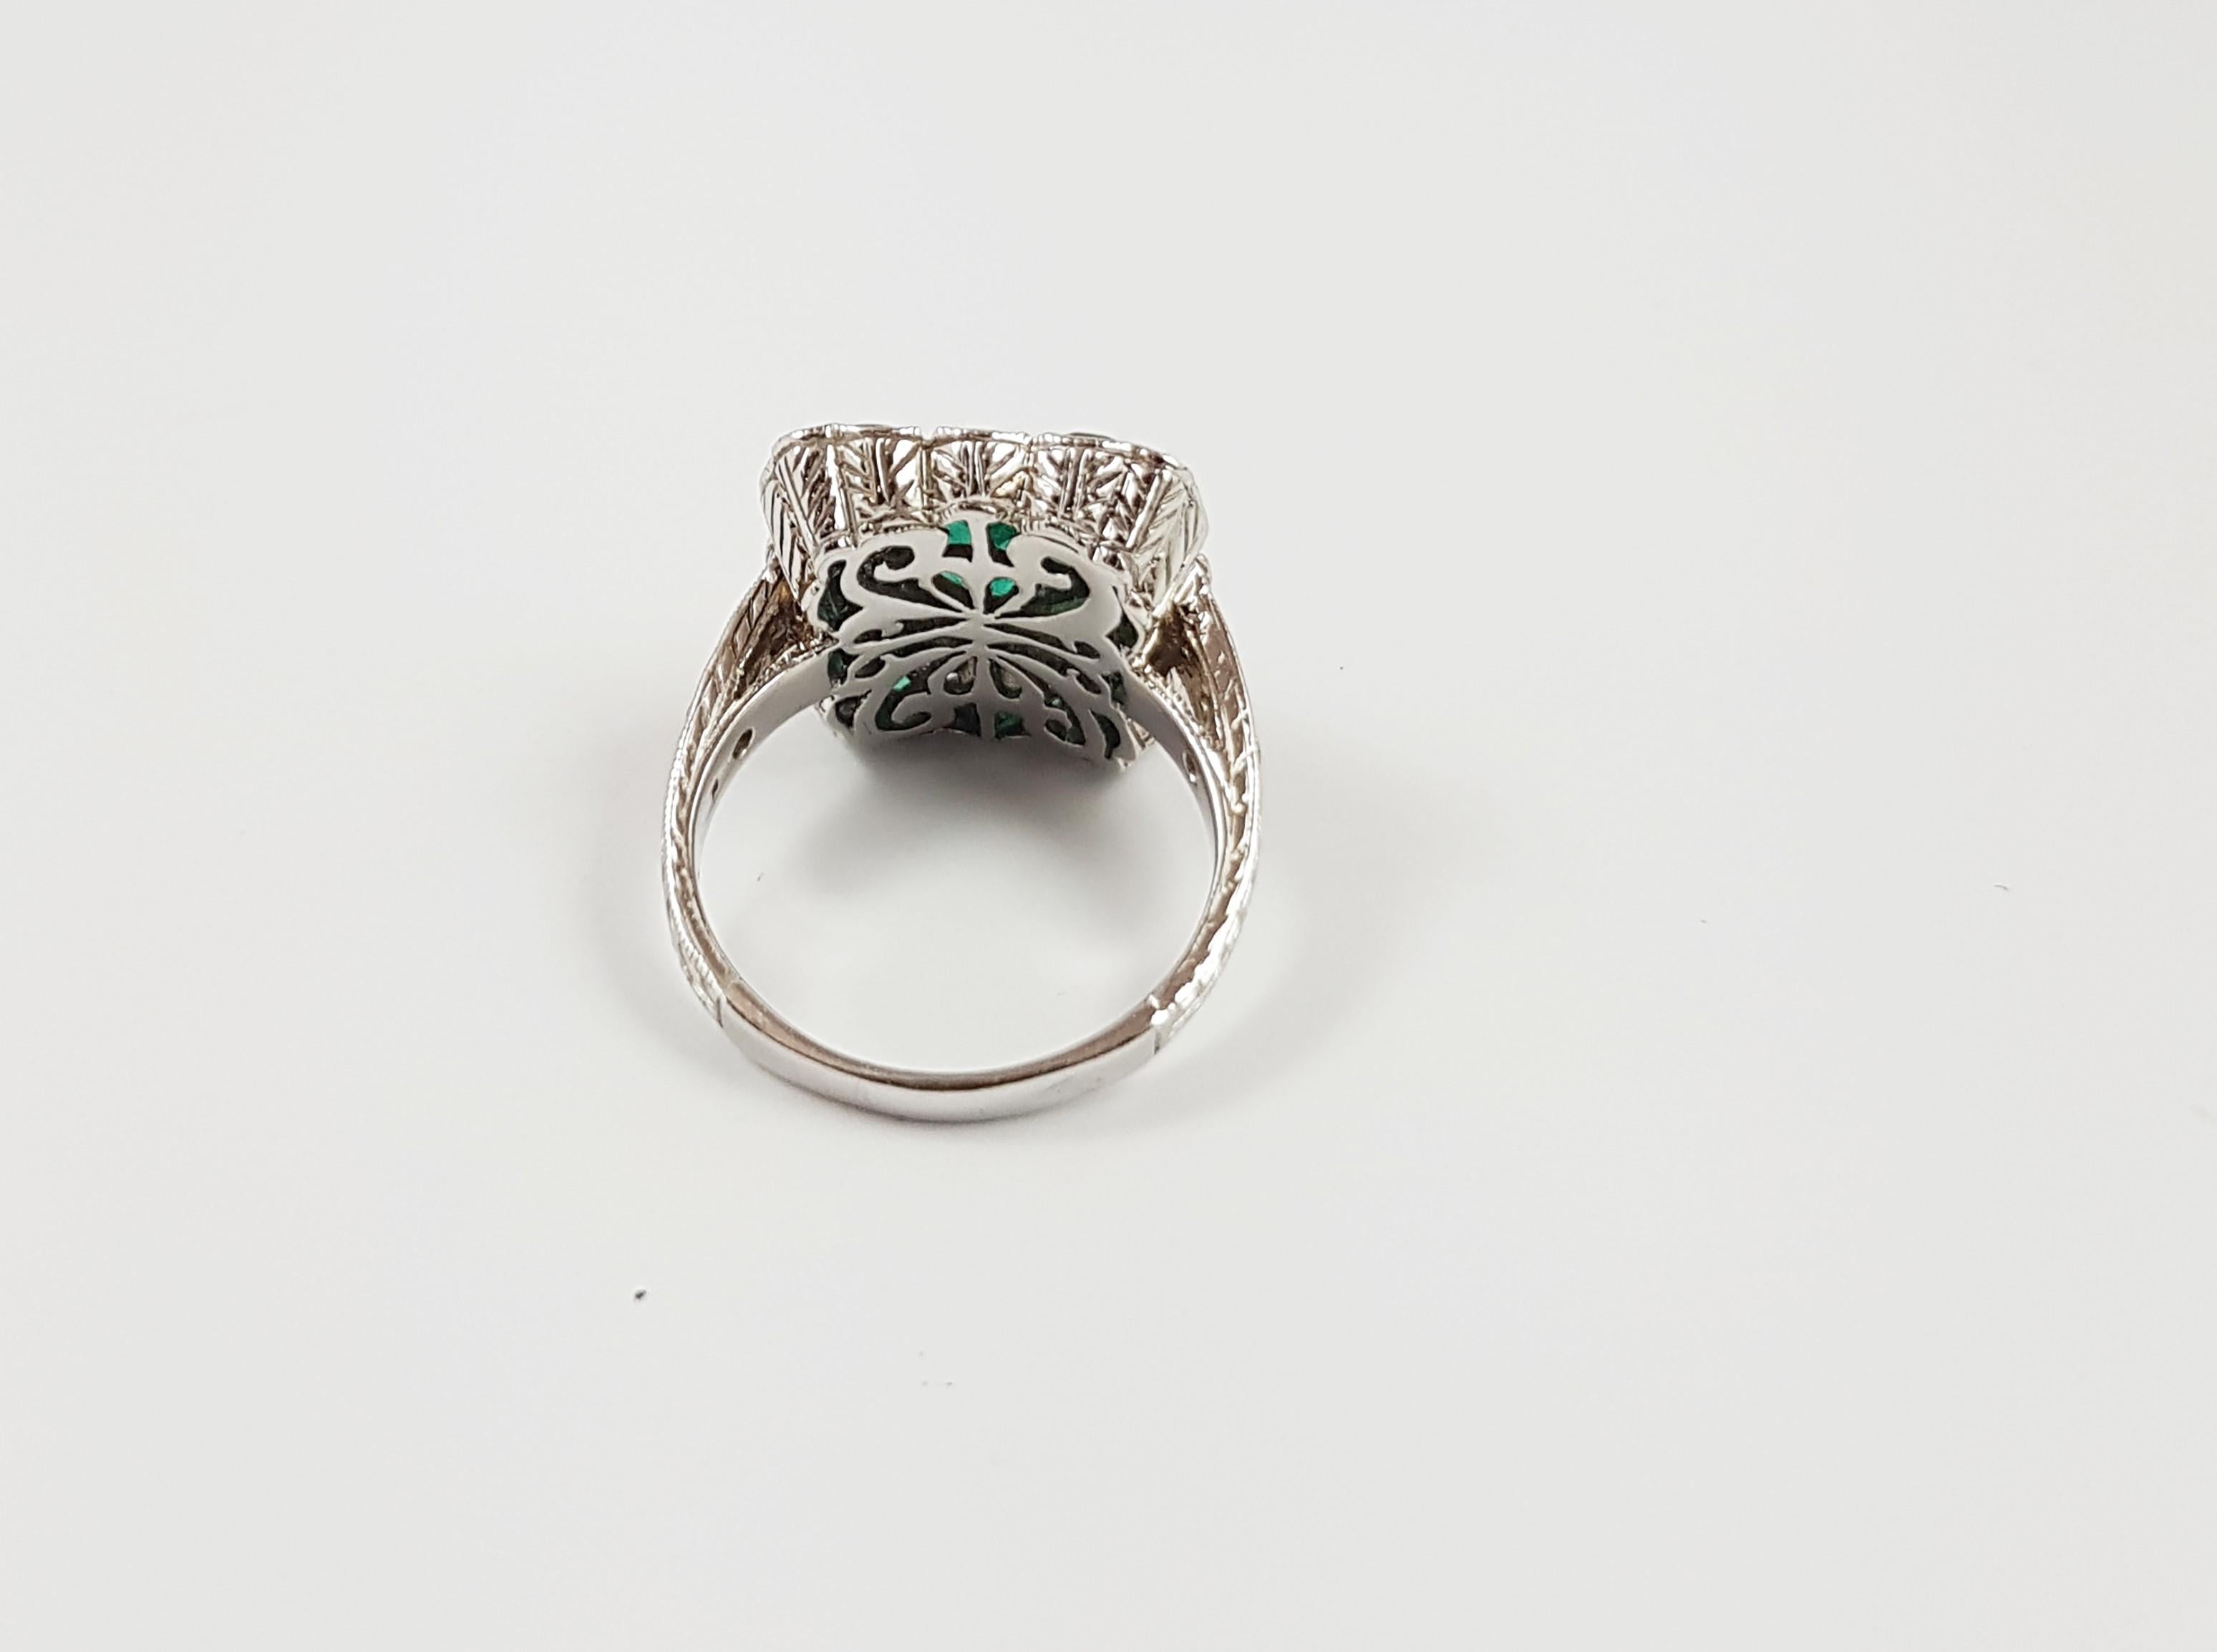 Emerald 1.18 carats with Emerald 1.40 carats and Diamond 0.67 carat Ring set in 18 Karat White Gold Settings

Width: 1.5 cm
Length: 1.5 cm 
Ring Size: 52

